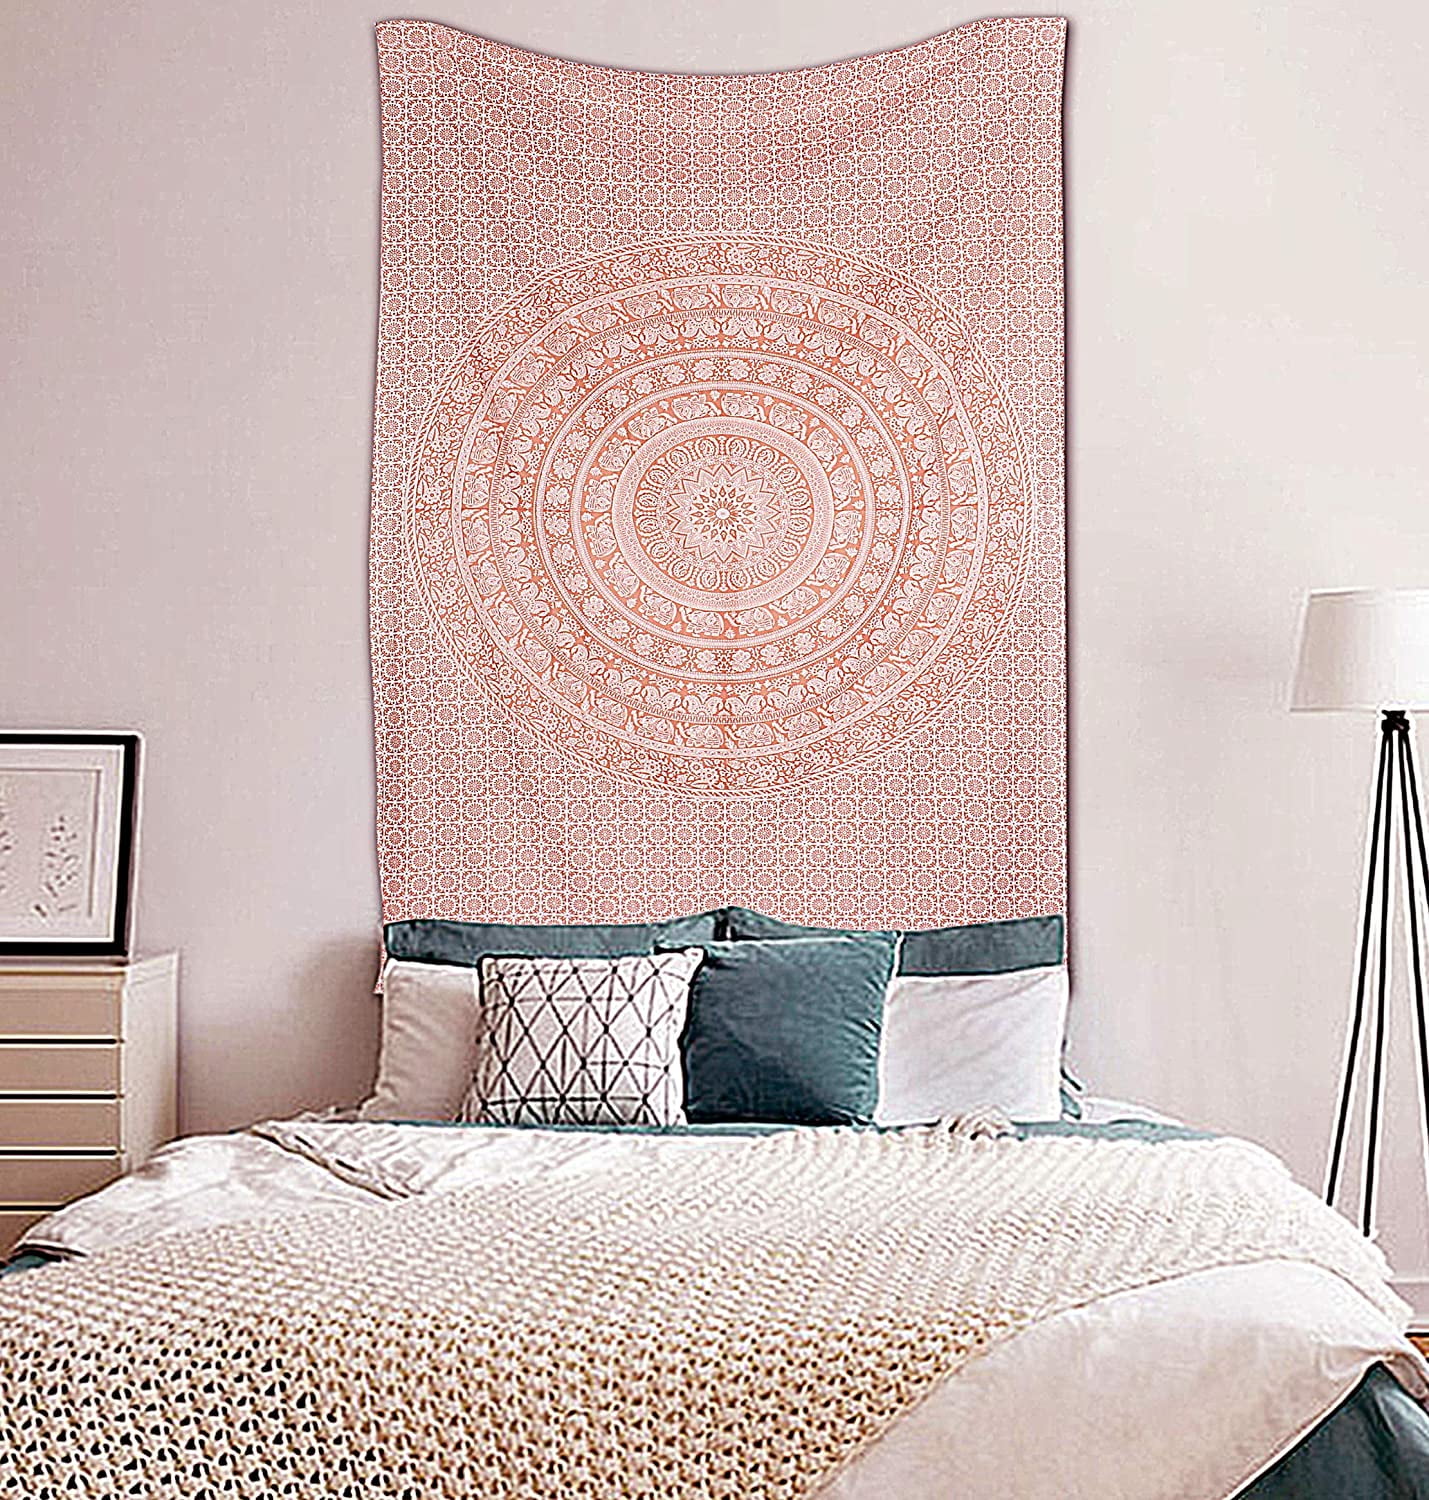 Psychedelic Mandala Elephant Printed Cotton Yoga Poster Tapestry Wall Decorative 